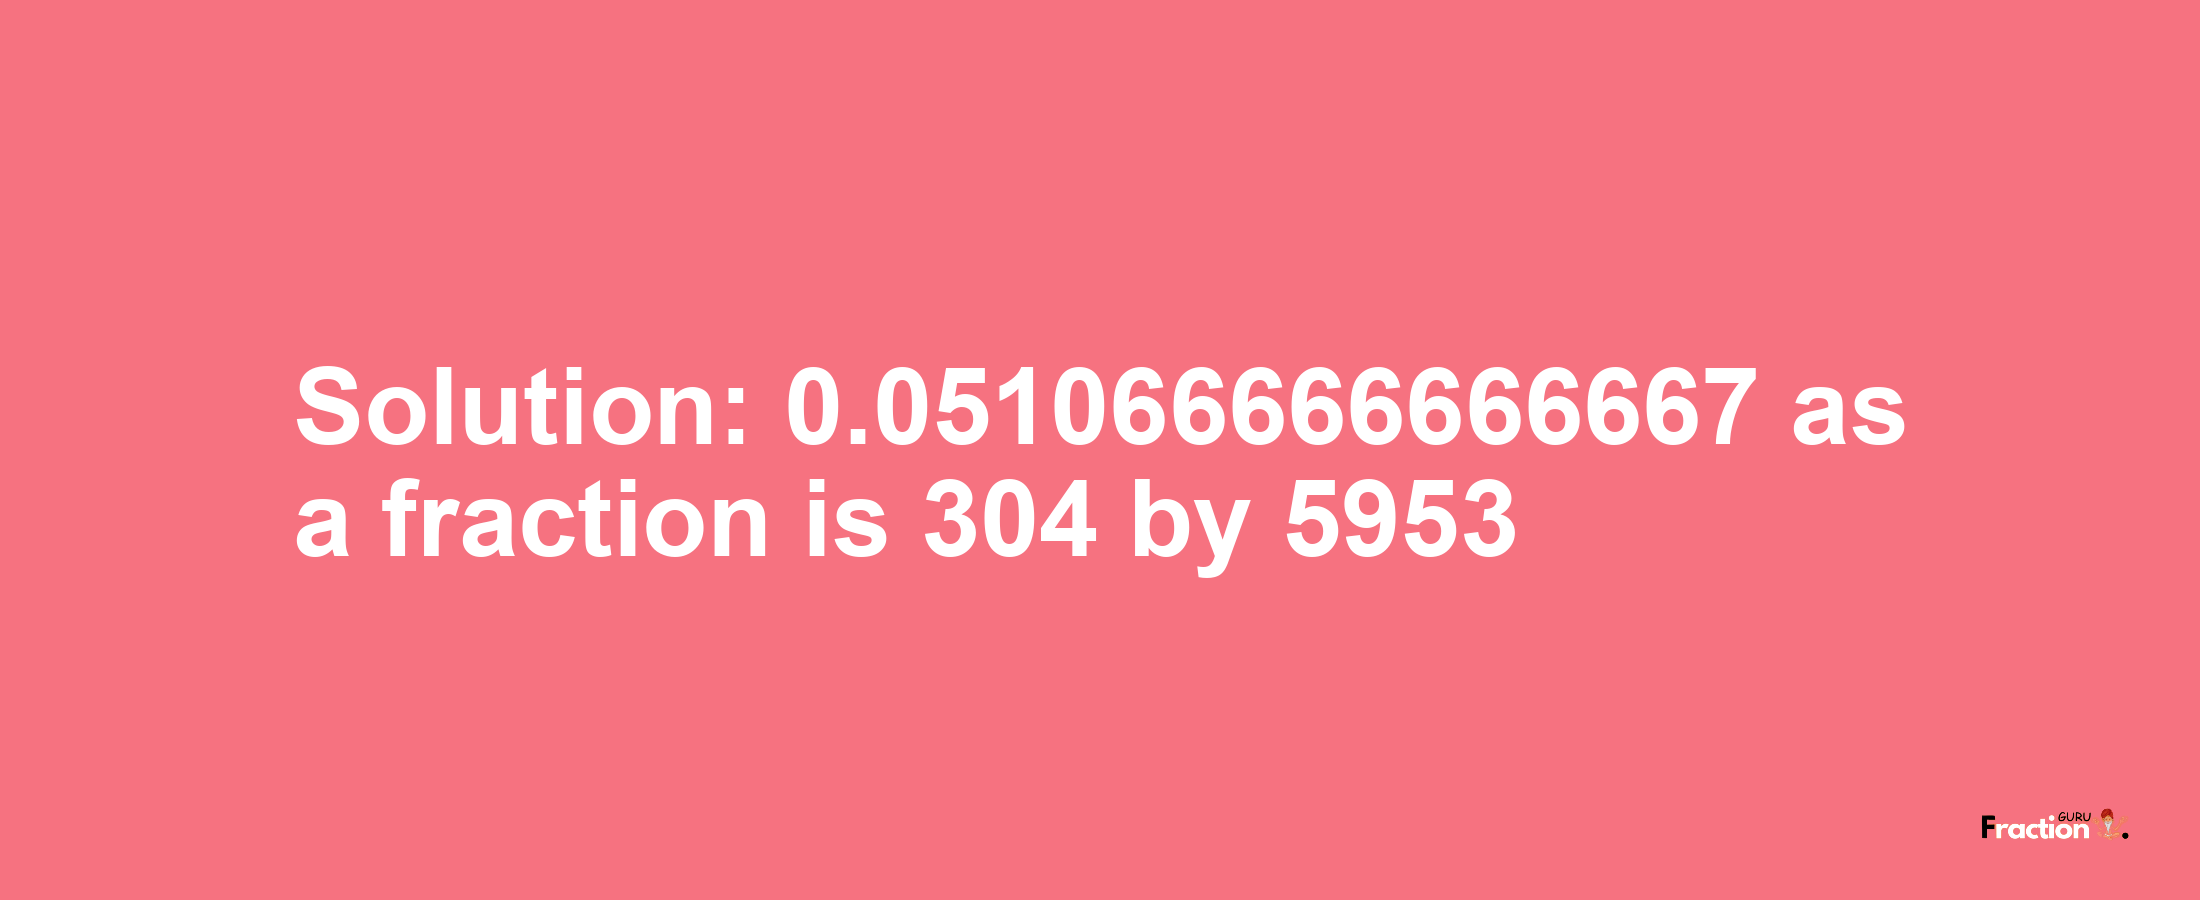 Solution:0.051066666666667 as a fraction is 304/5953